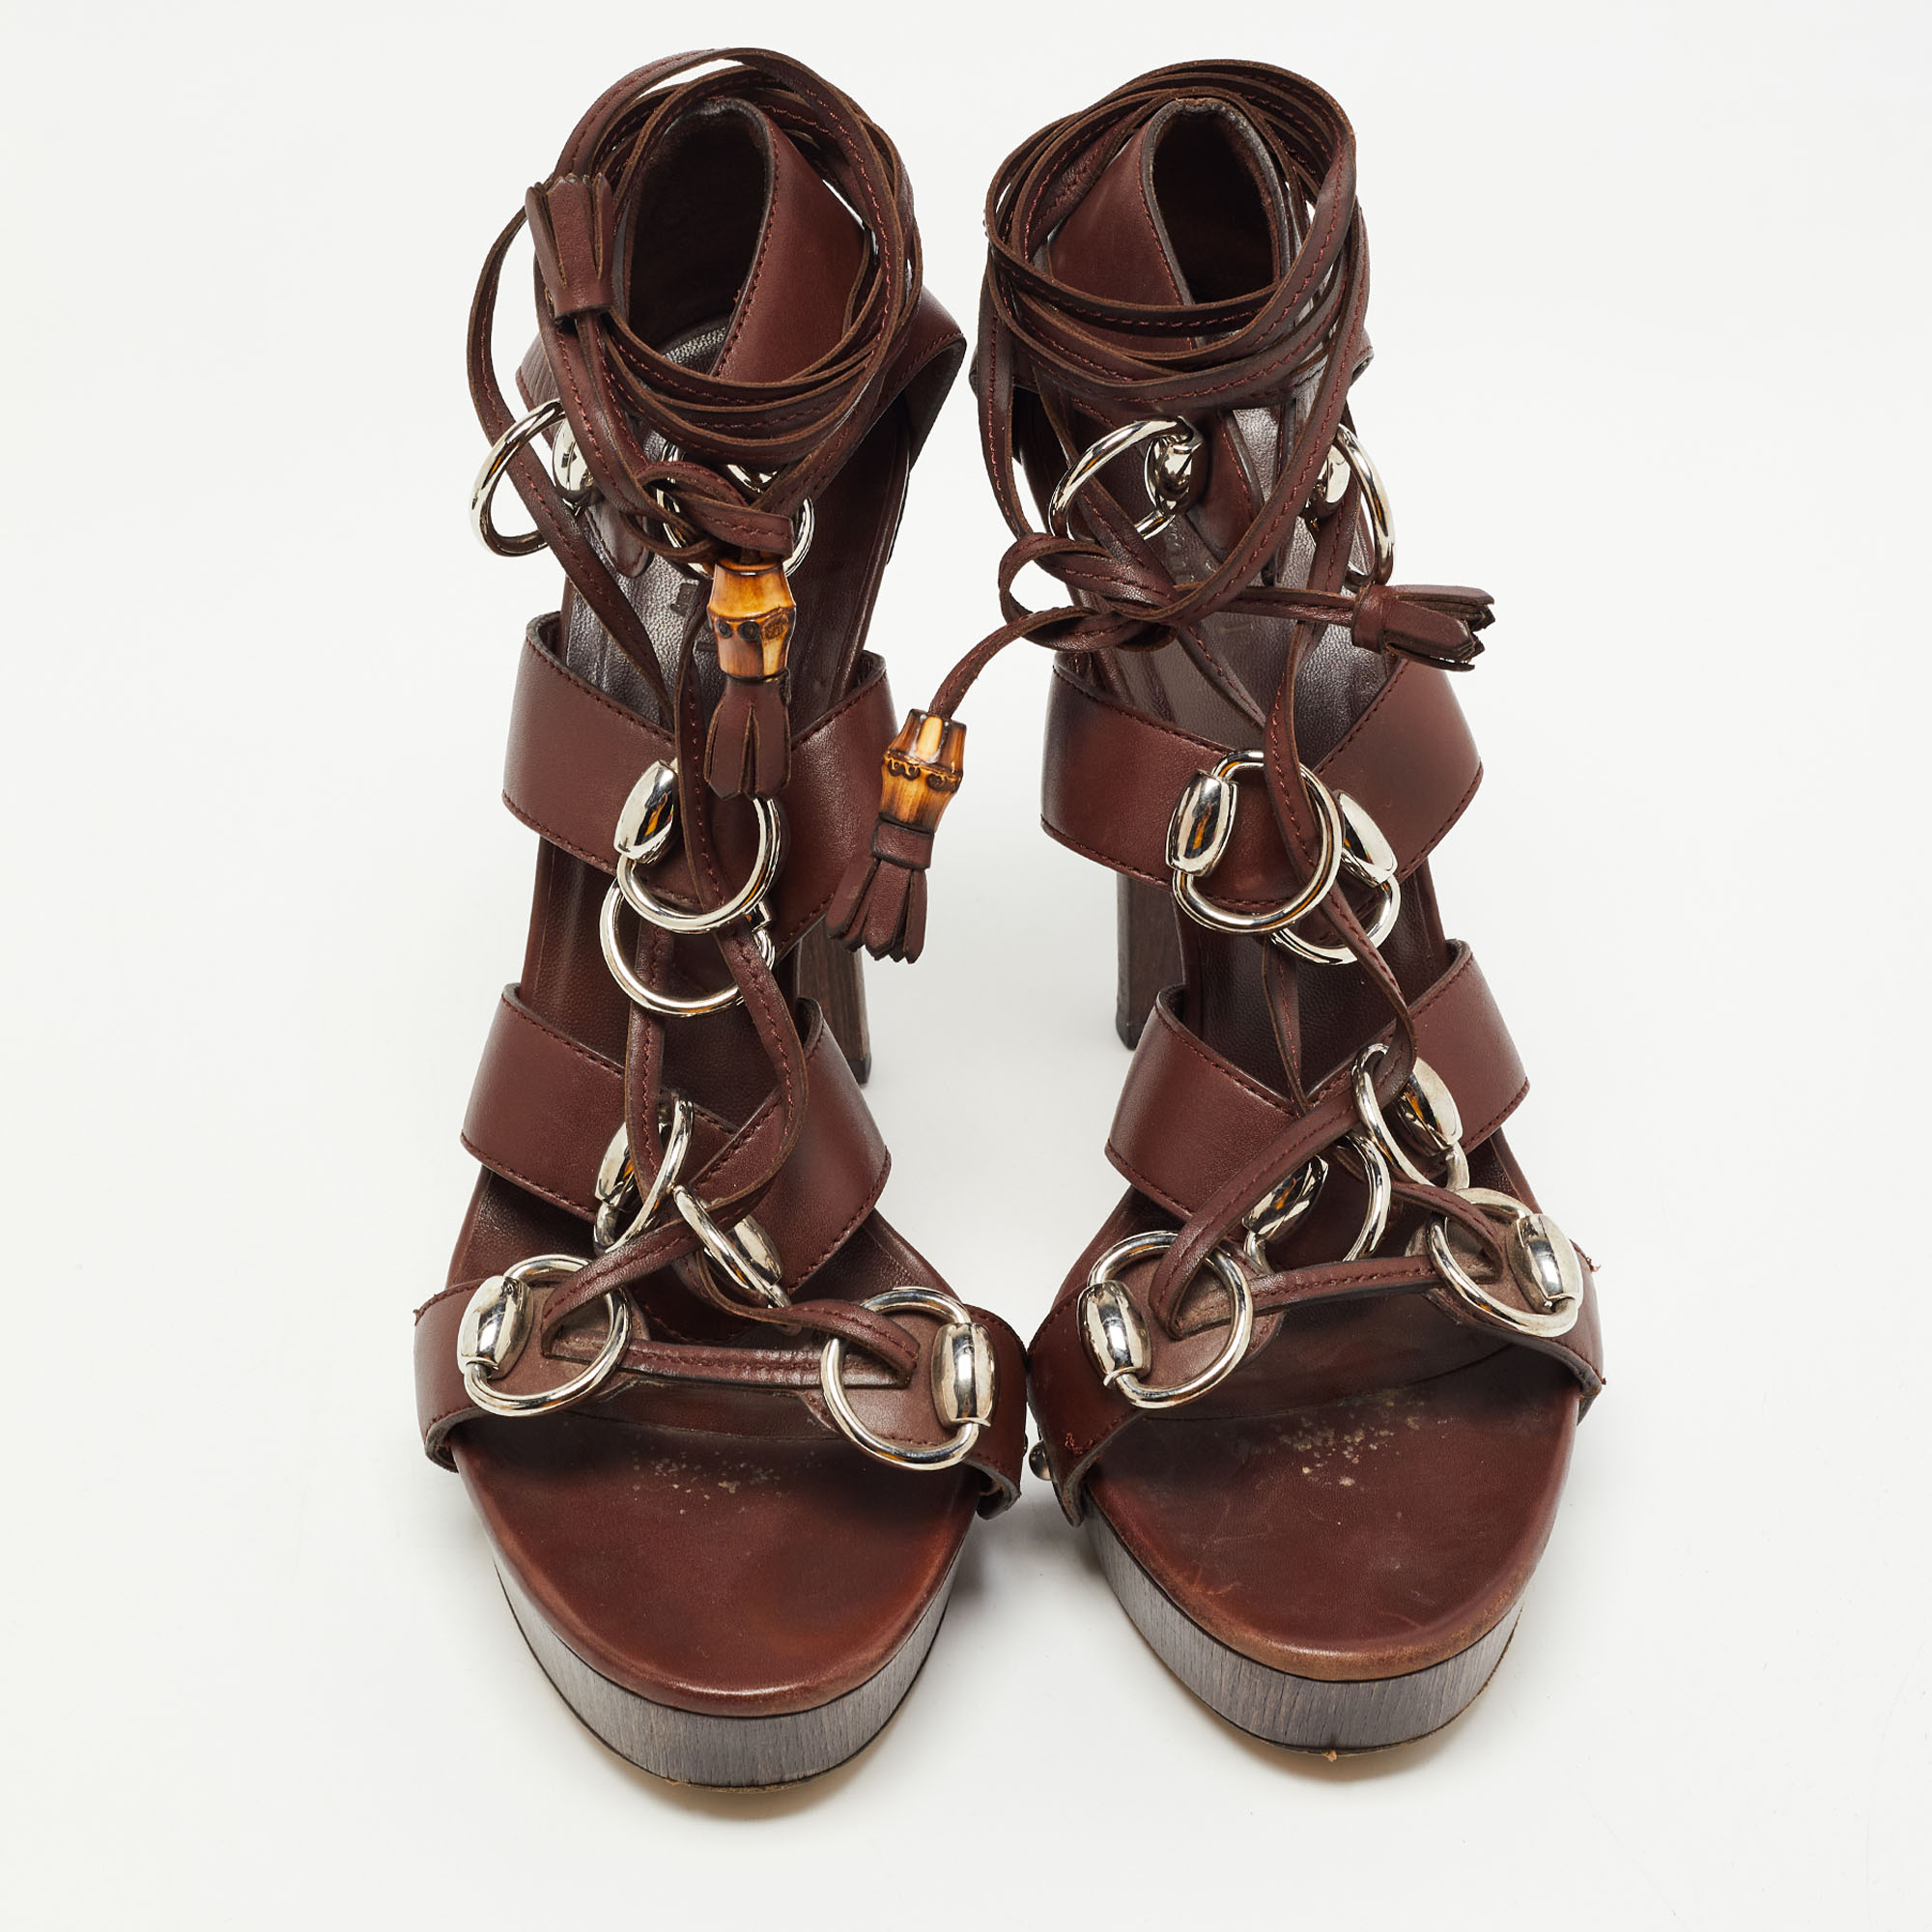 Gucci Brown Leather Gladiator Sandals Size 40.5